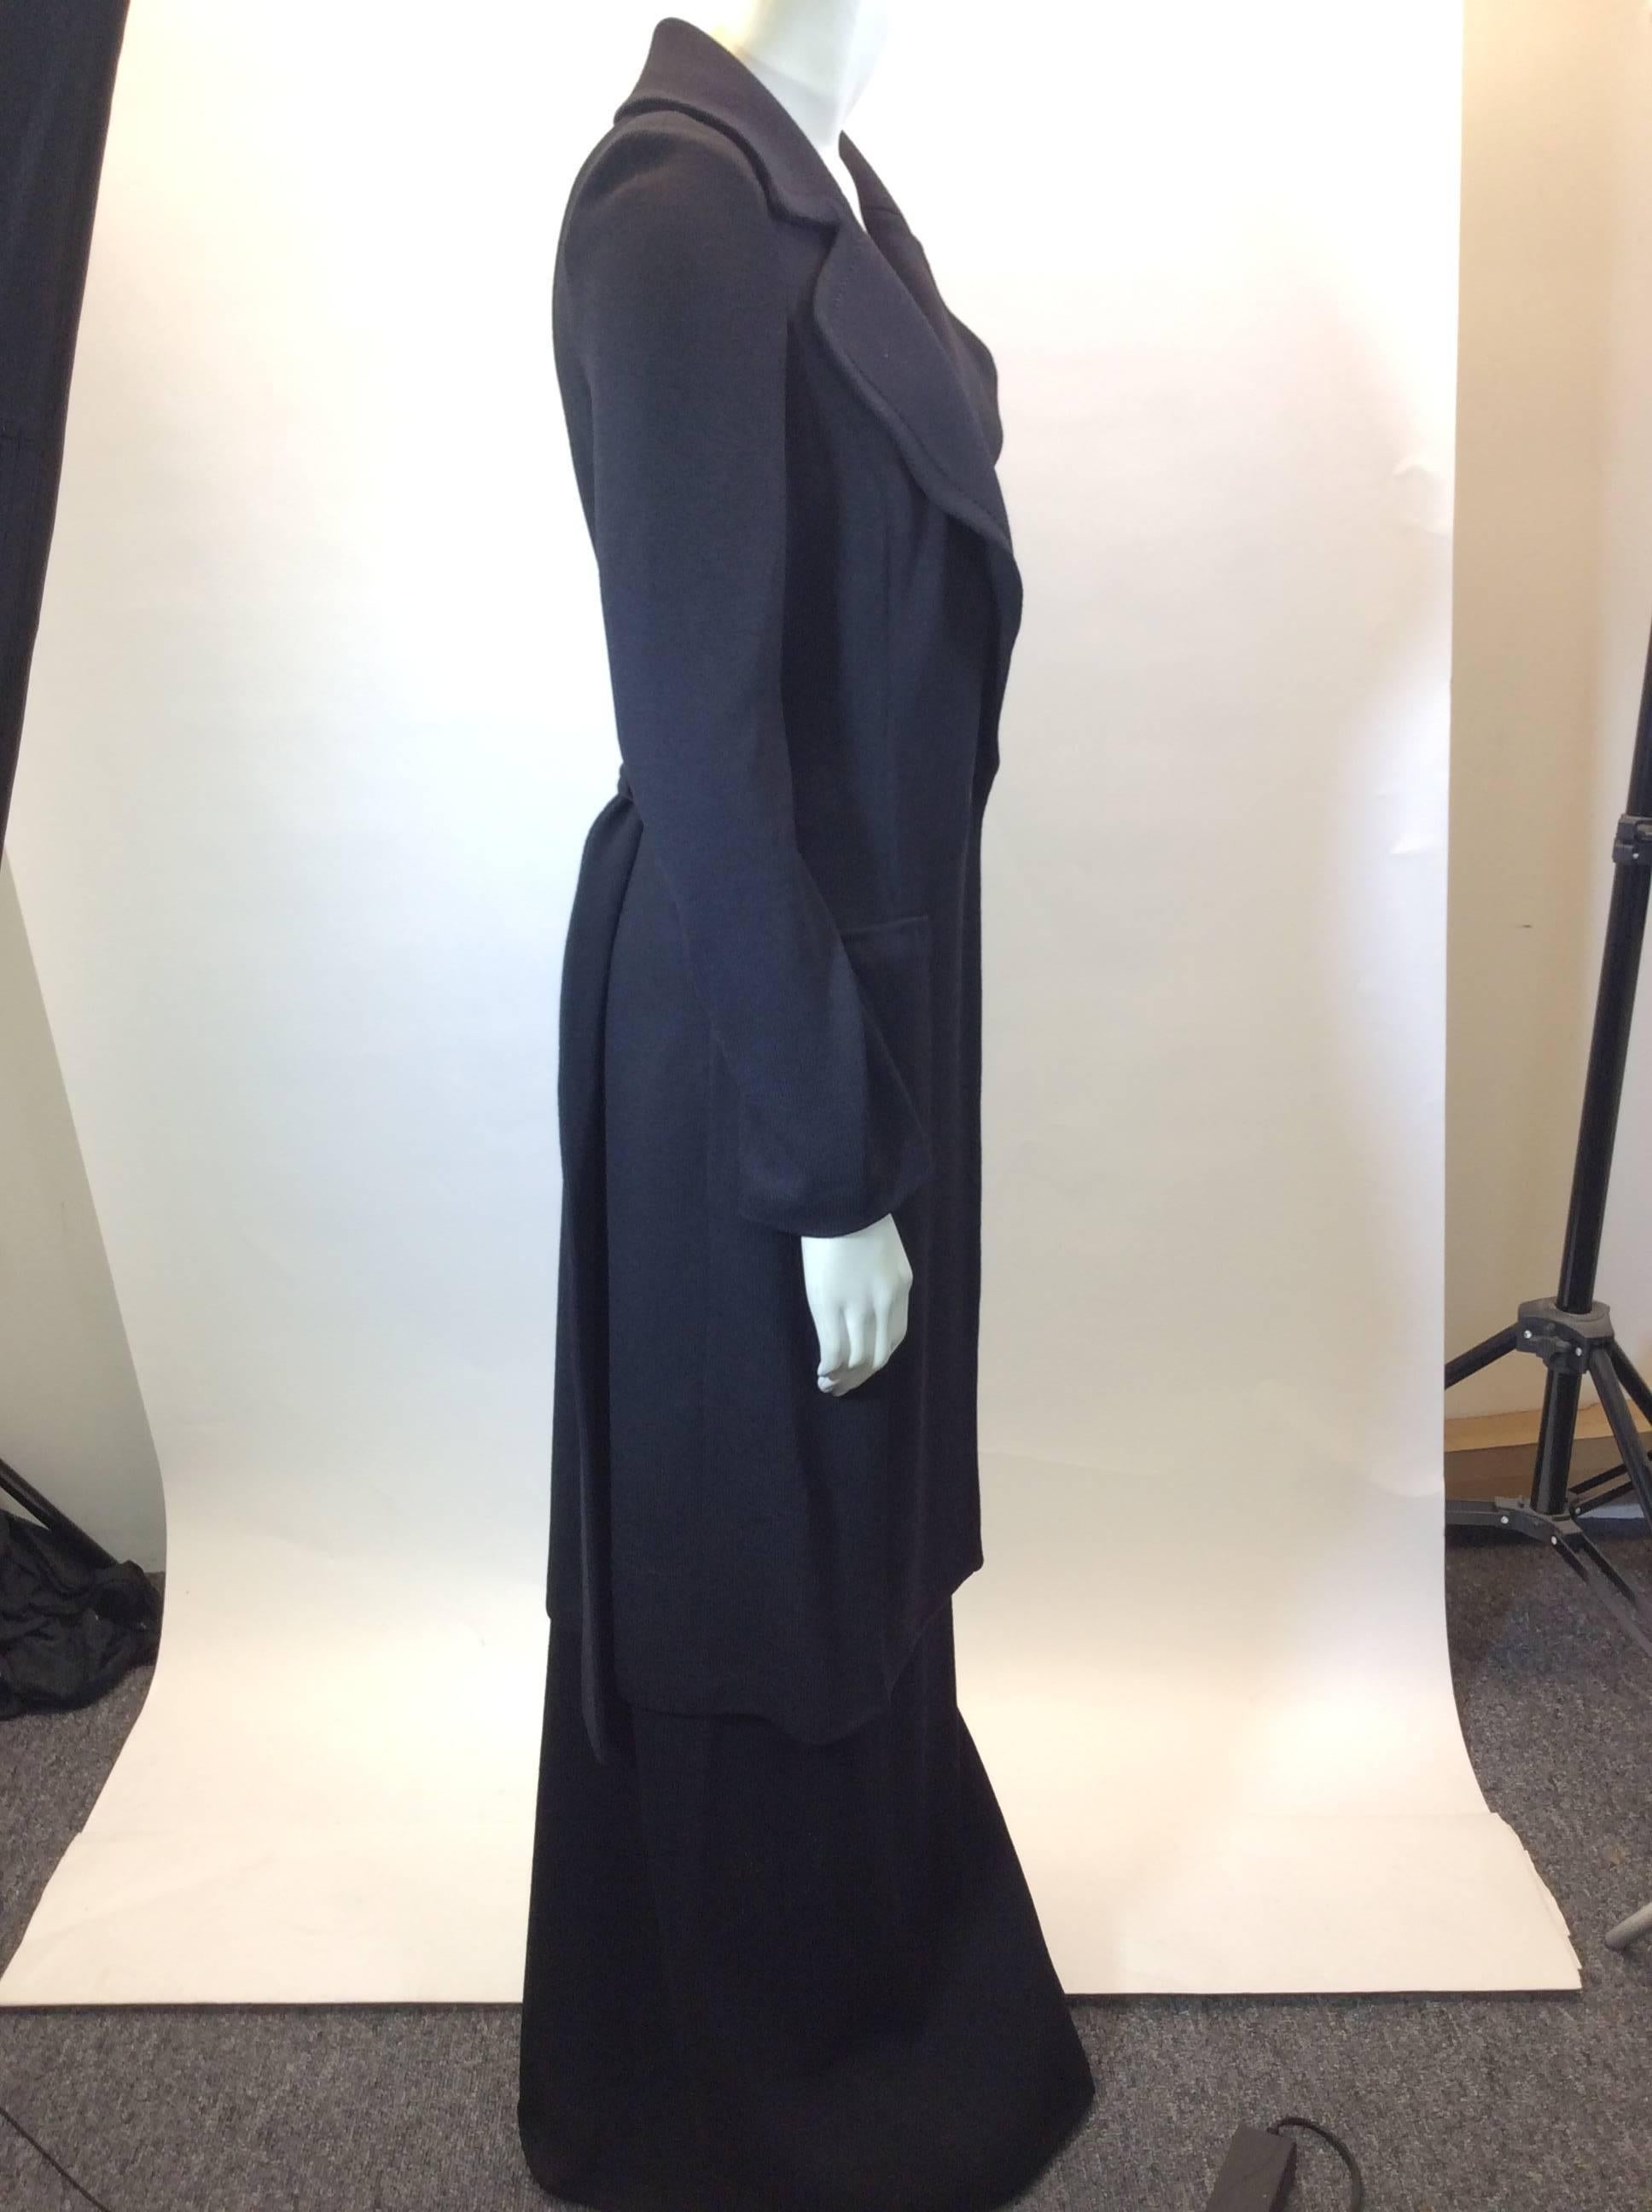 St John Black Skirt Set
Jacket is a long trench with belt and 2 deep pockets
Skirt is ankle length
Size 4 